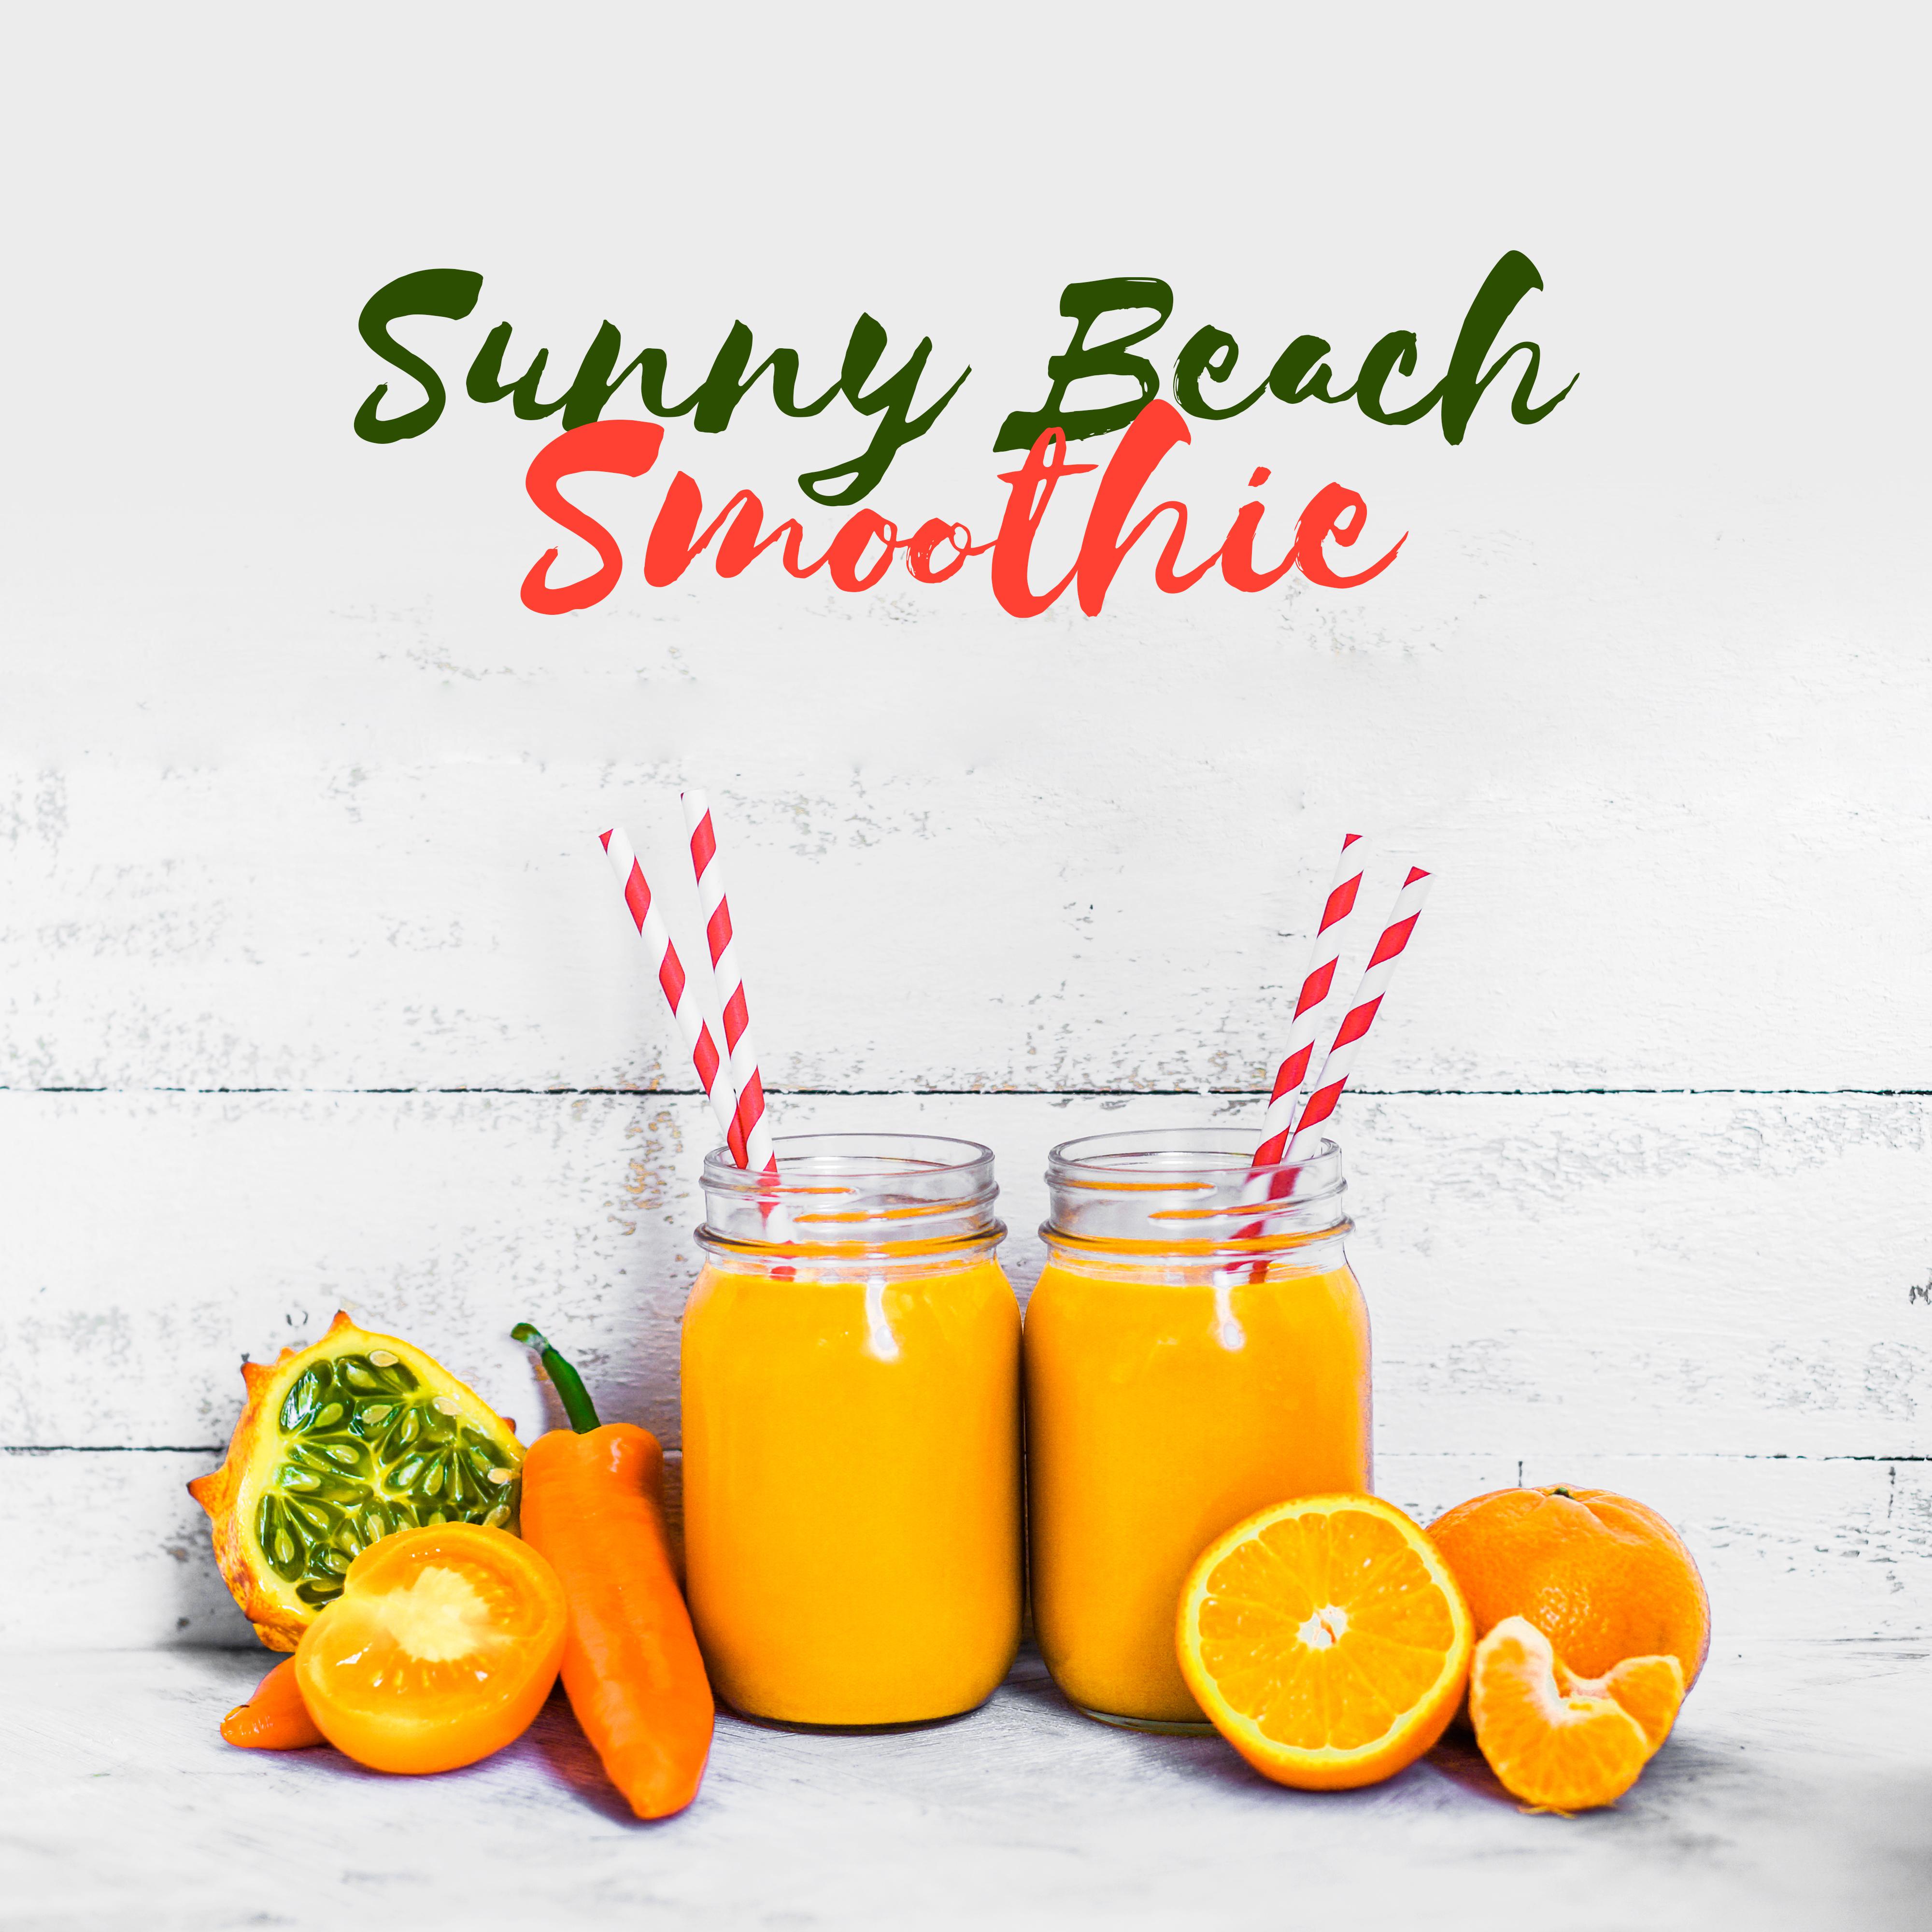 Sunny Beach Smoothie – Chill Out 2017, Ibiza Beach, Party Hits, Drink Bar Music, Summer